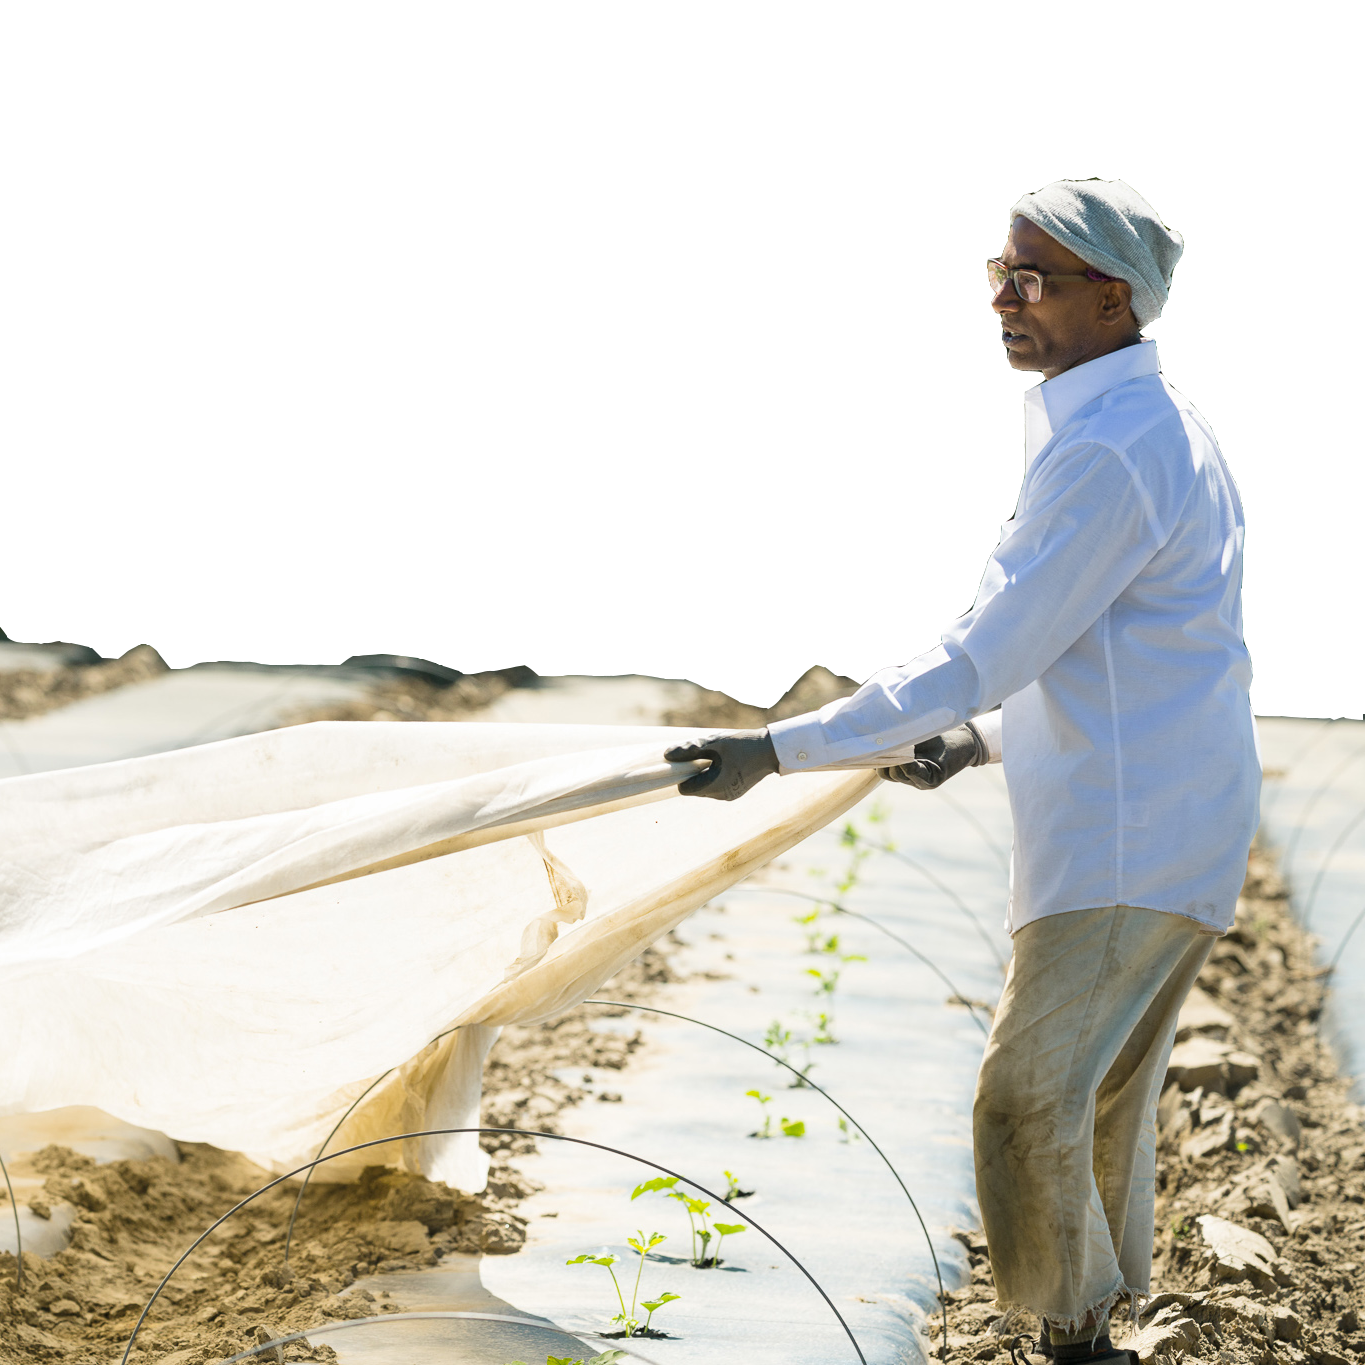 A farmer covers his crops with a sheet.